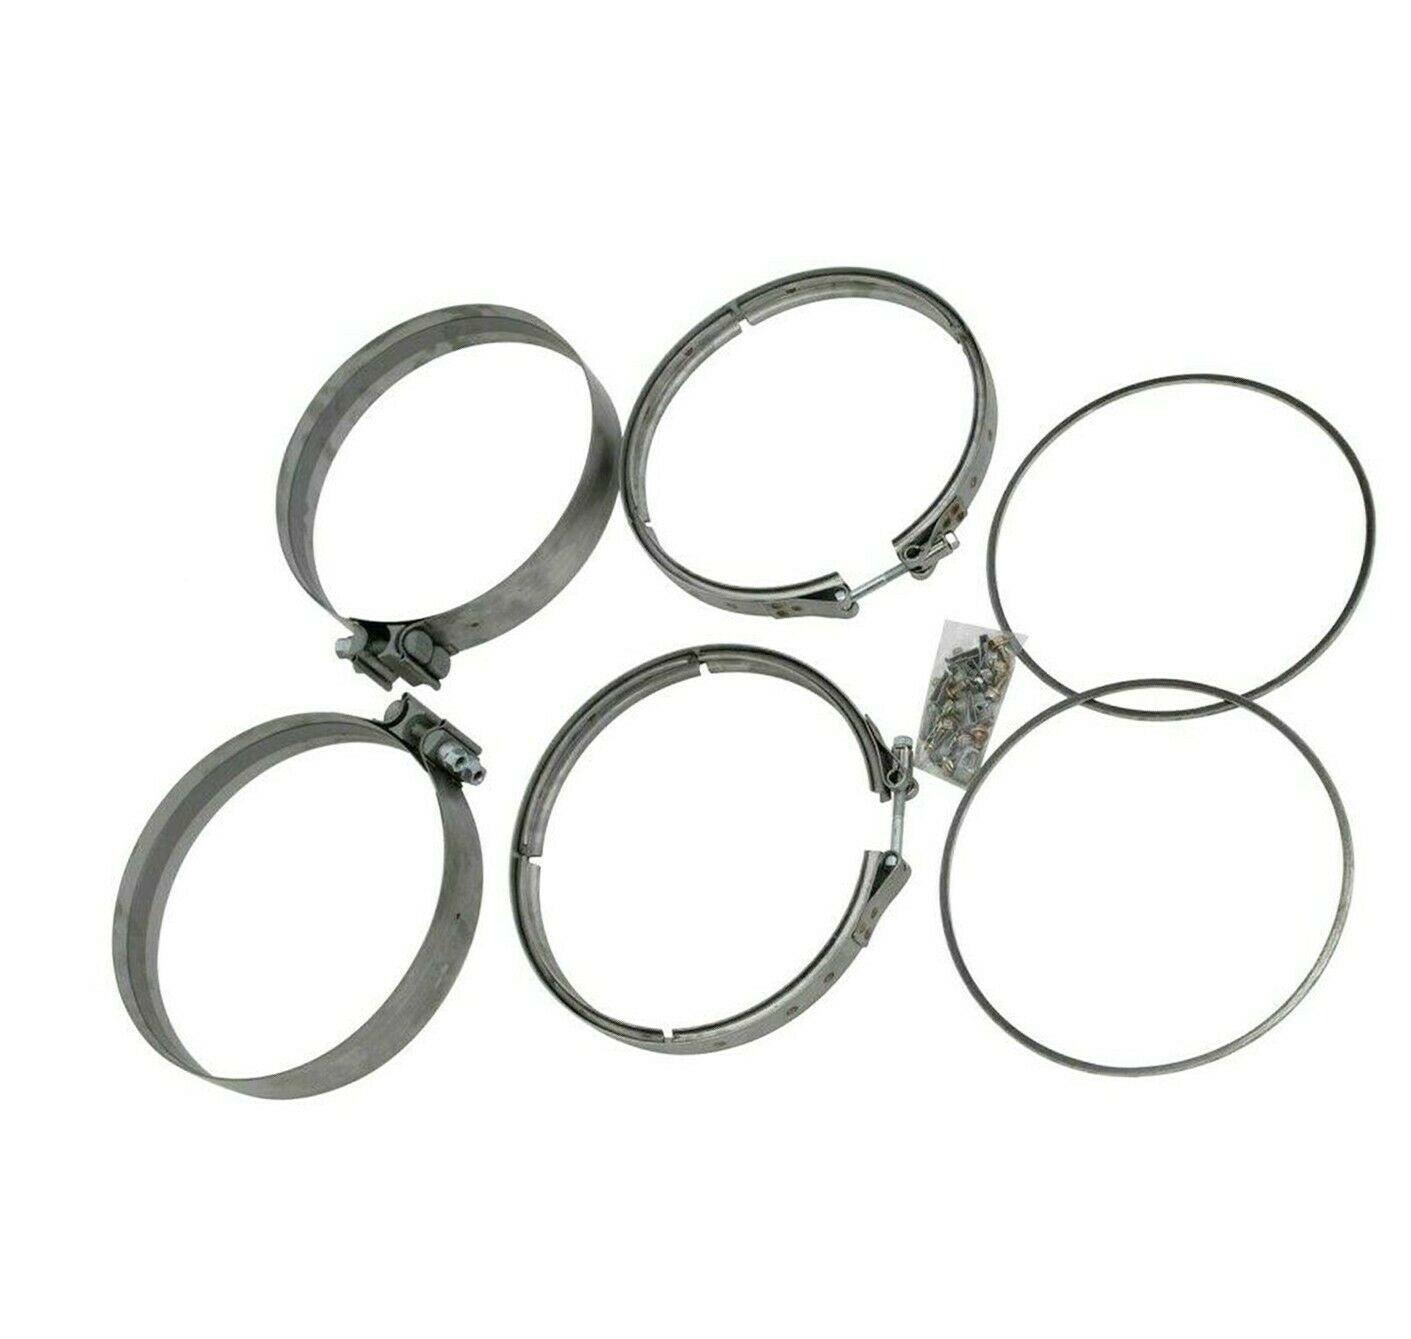 A6809950302 Genuine Detroit Diesel Dpf Filter Clamps & Gaskets Kit - ADVANCED TRUCK PARTS